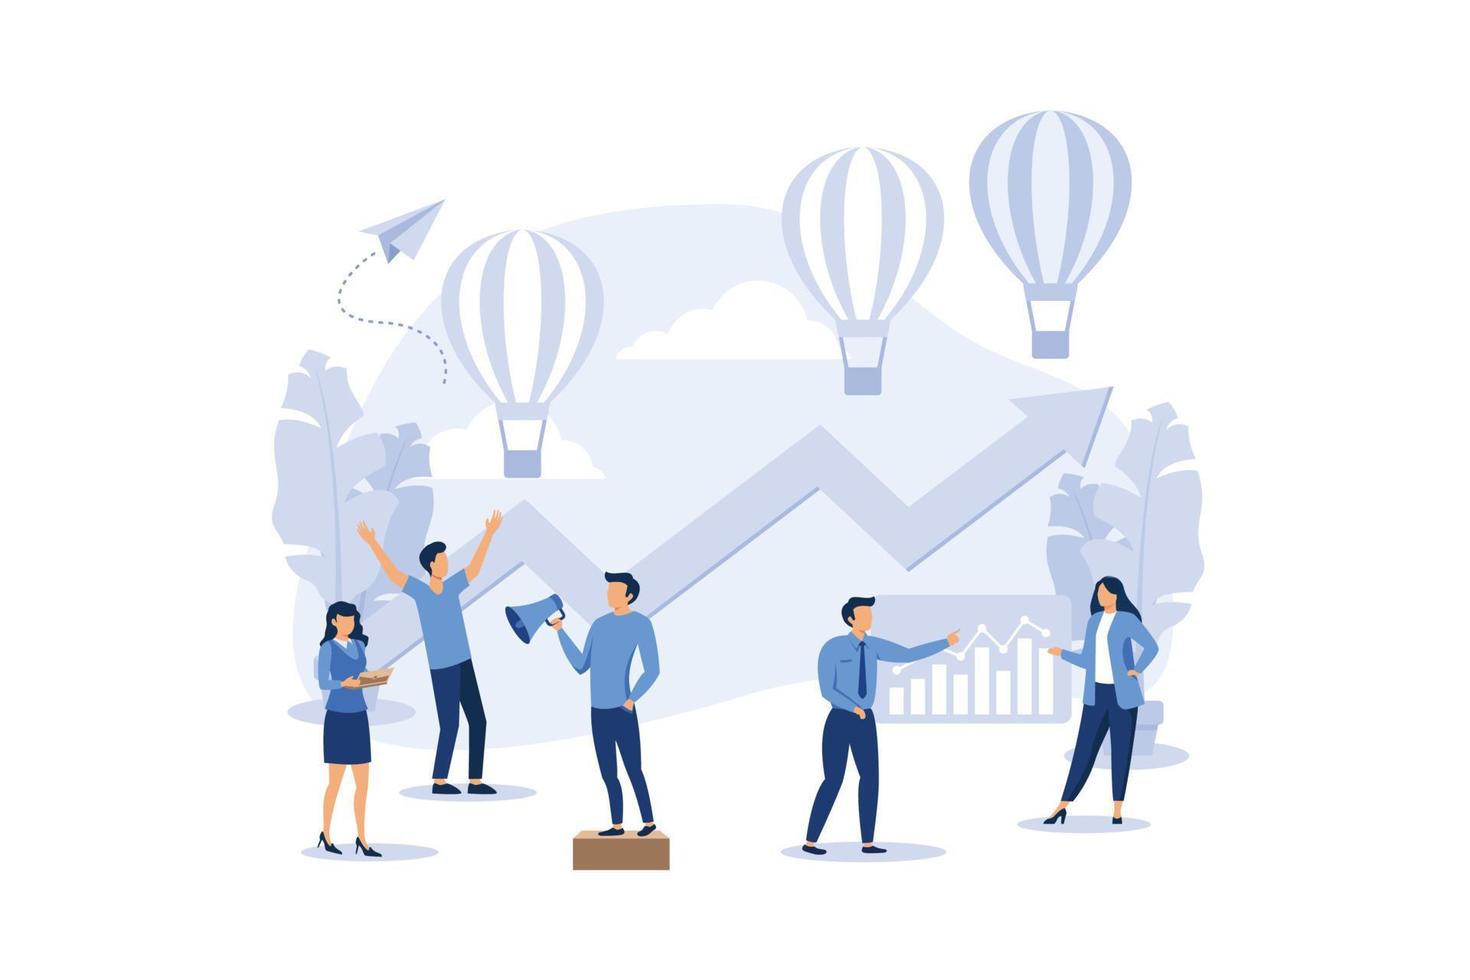 group of people characters are thinking over an idea. prepare a business project start up. rise of the career to success, flat color icons, business analysis vector illustration